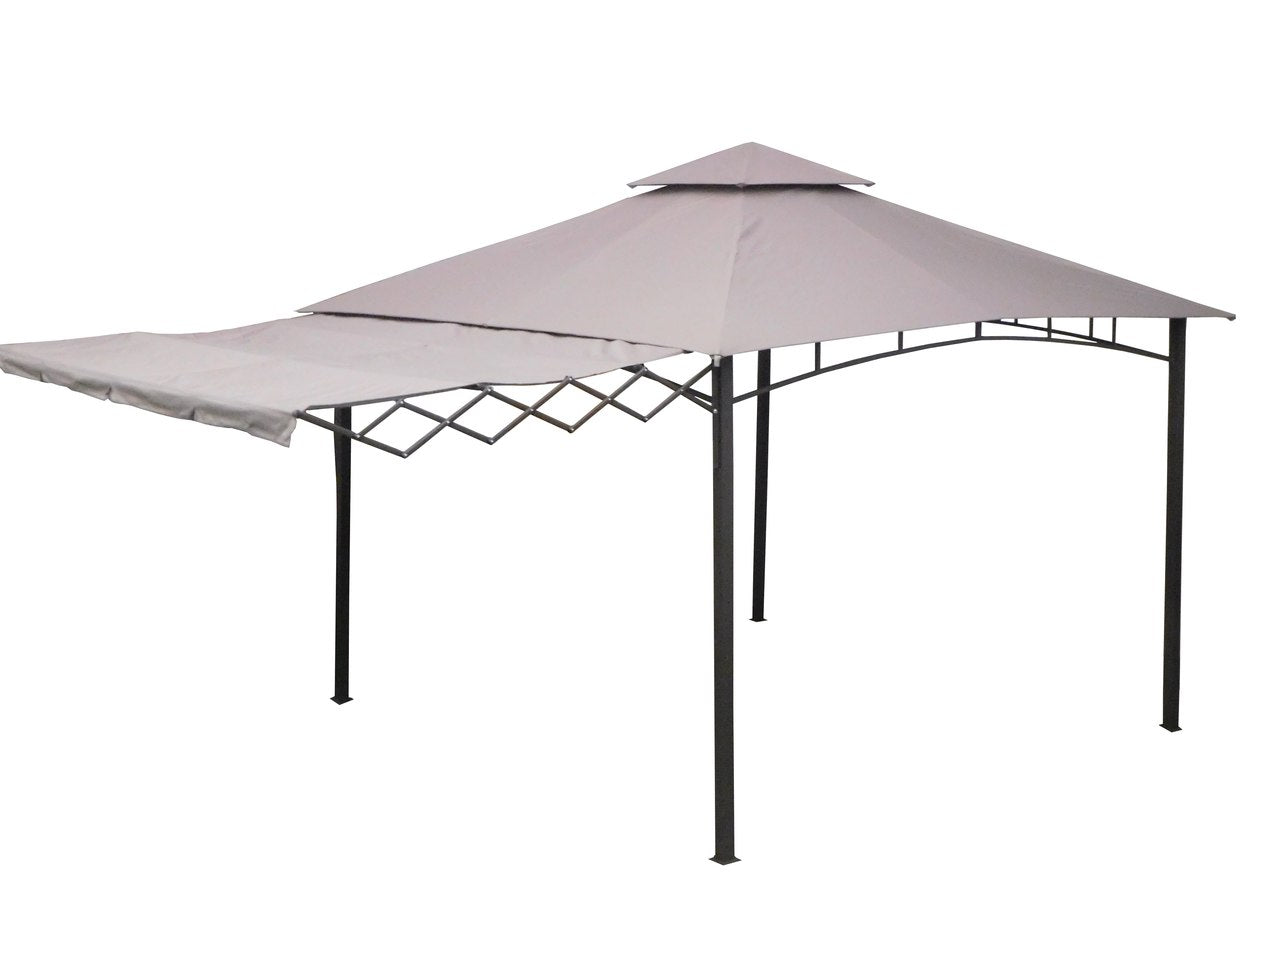 Gazebo 3.3m x 3.3m with Retractable Awning